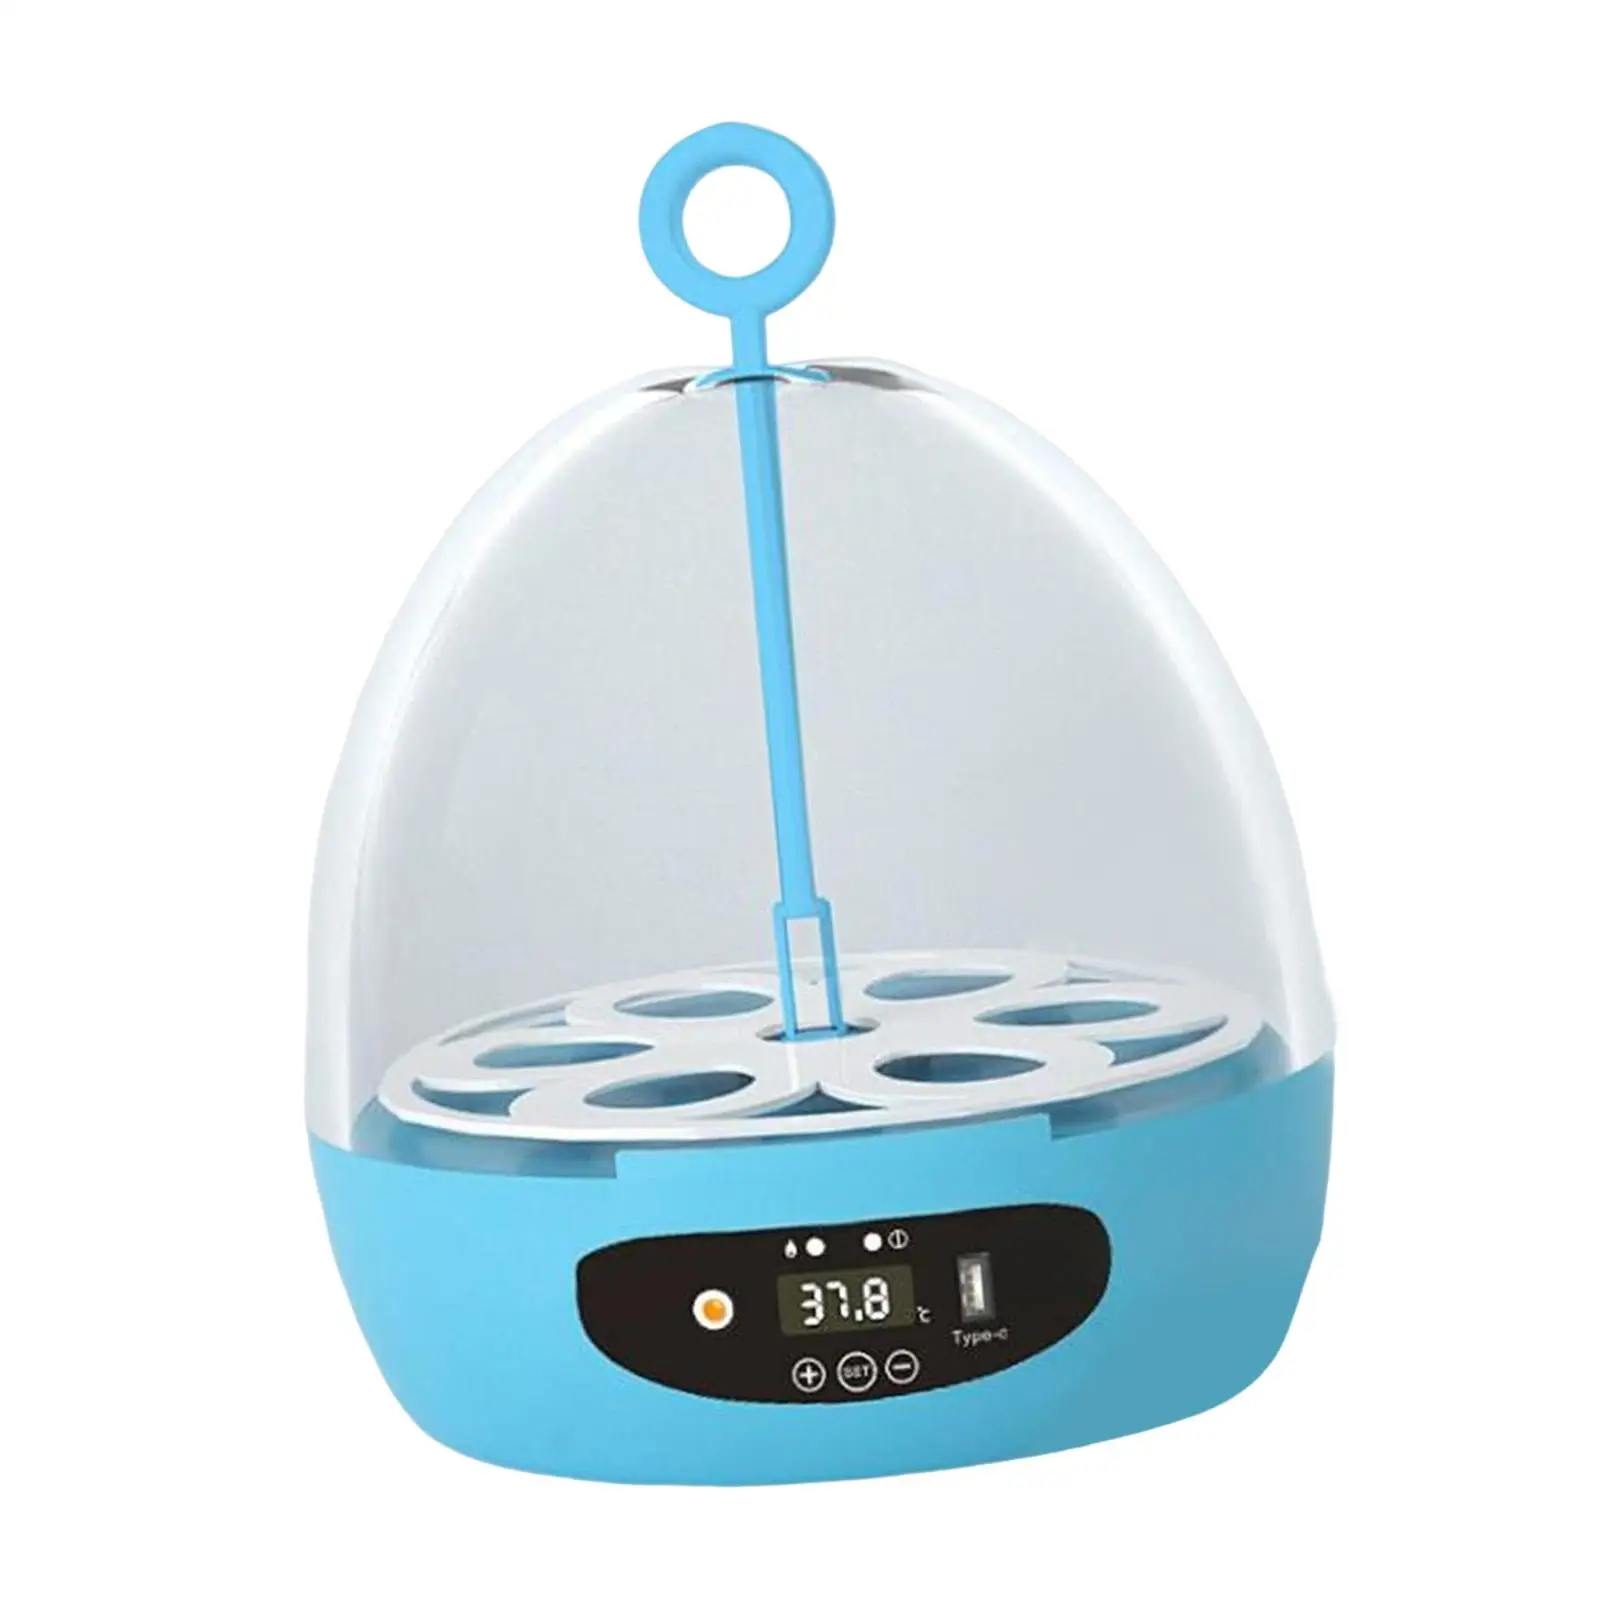 Electric Egg Incubator for Hatching Eggs USB Hatcher Machine with Light Temperature Control for Goose Pigeon Poultry Family Use